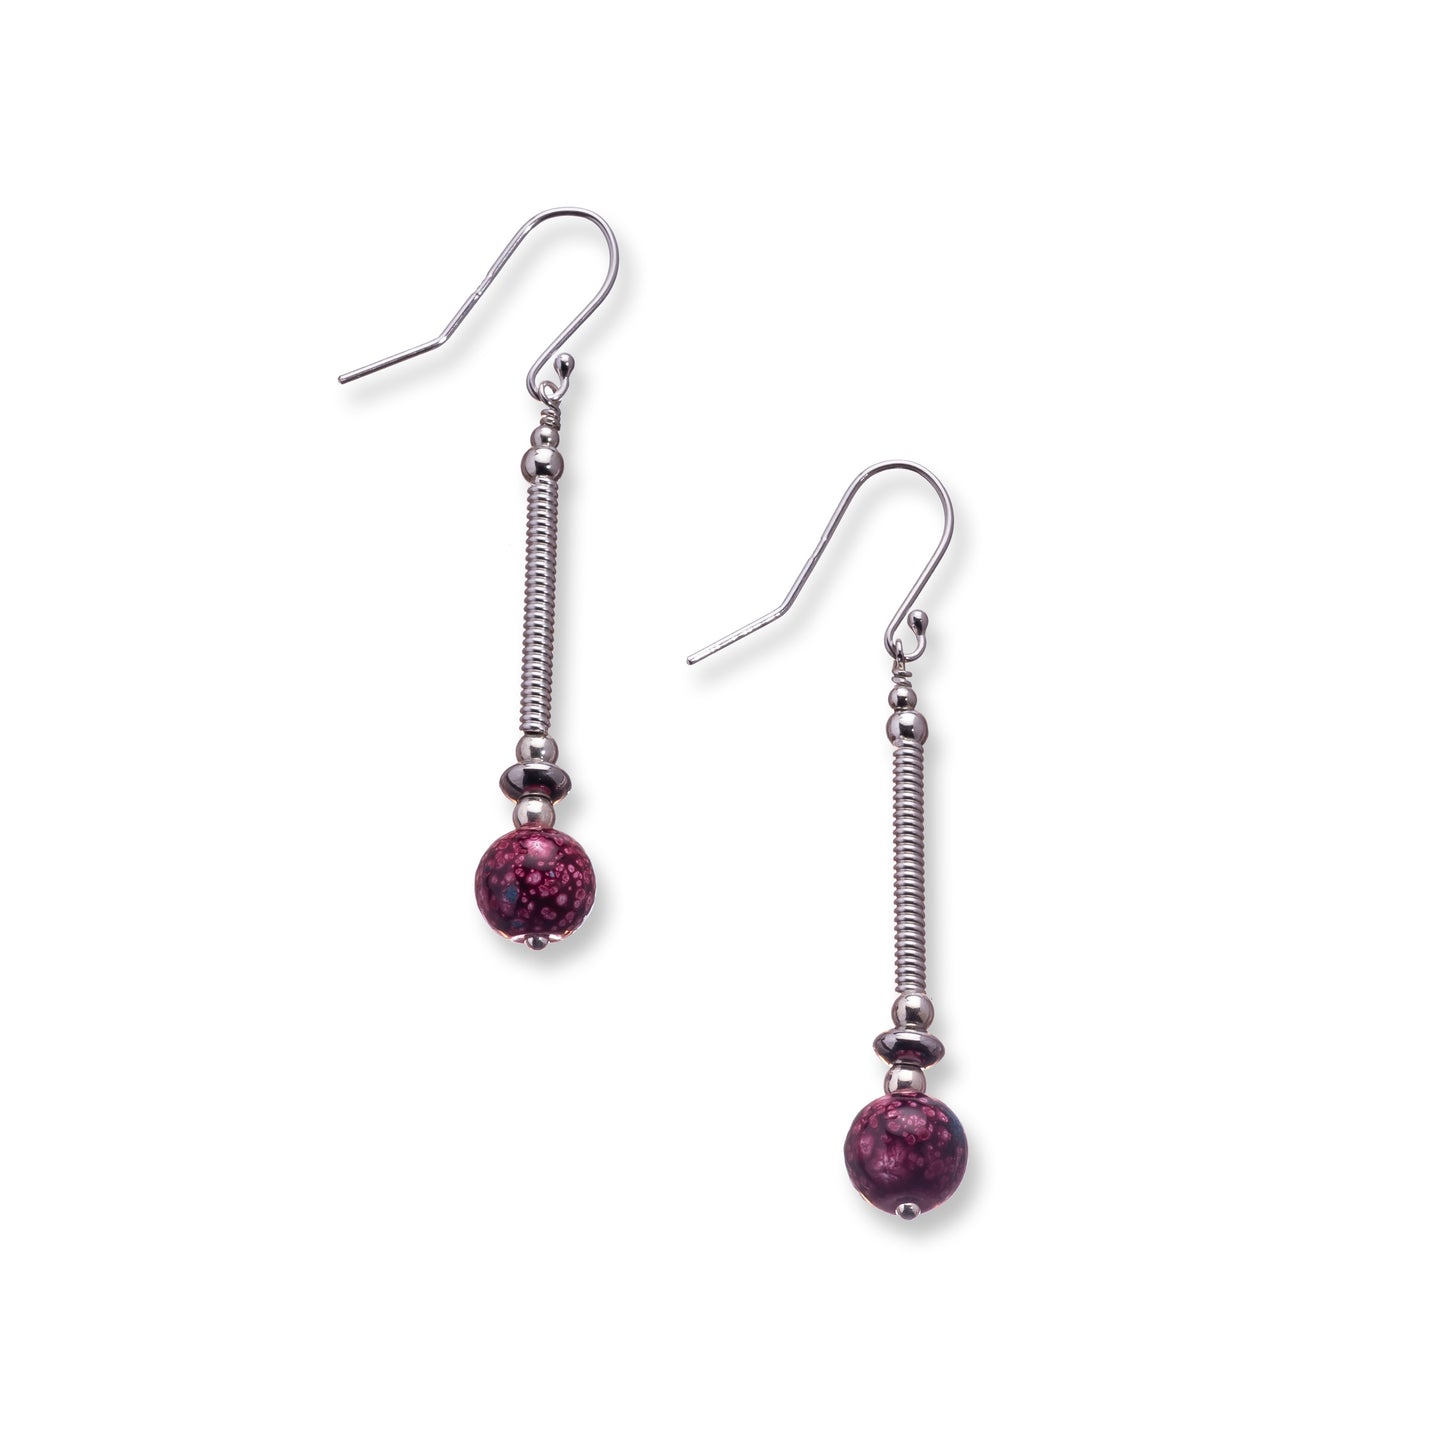 Silver filled drops with deep red spotted glass beads, sterling silver beads and stainless steel flat beads. These earrings sit on sterling silver ear wires and come with backs included. The drop length of these earrings is 4cm and measured from the base of the ear wire. They come in beautifully presented in an eco friendly branded gift box for safe keeping. Designed & Handmade in Dingle